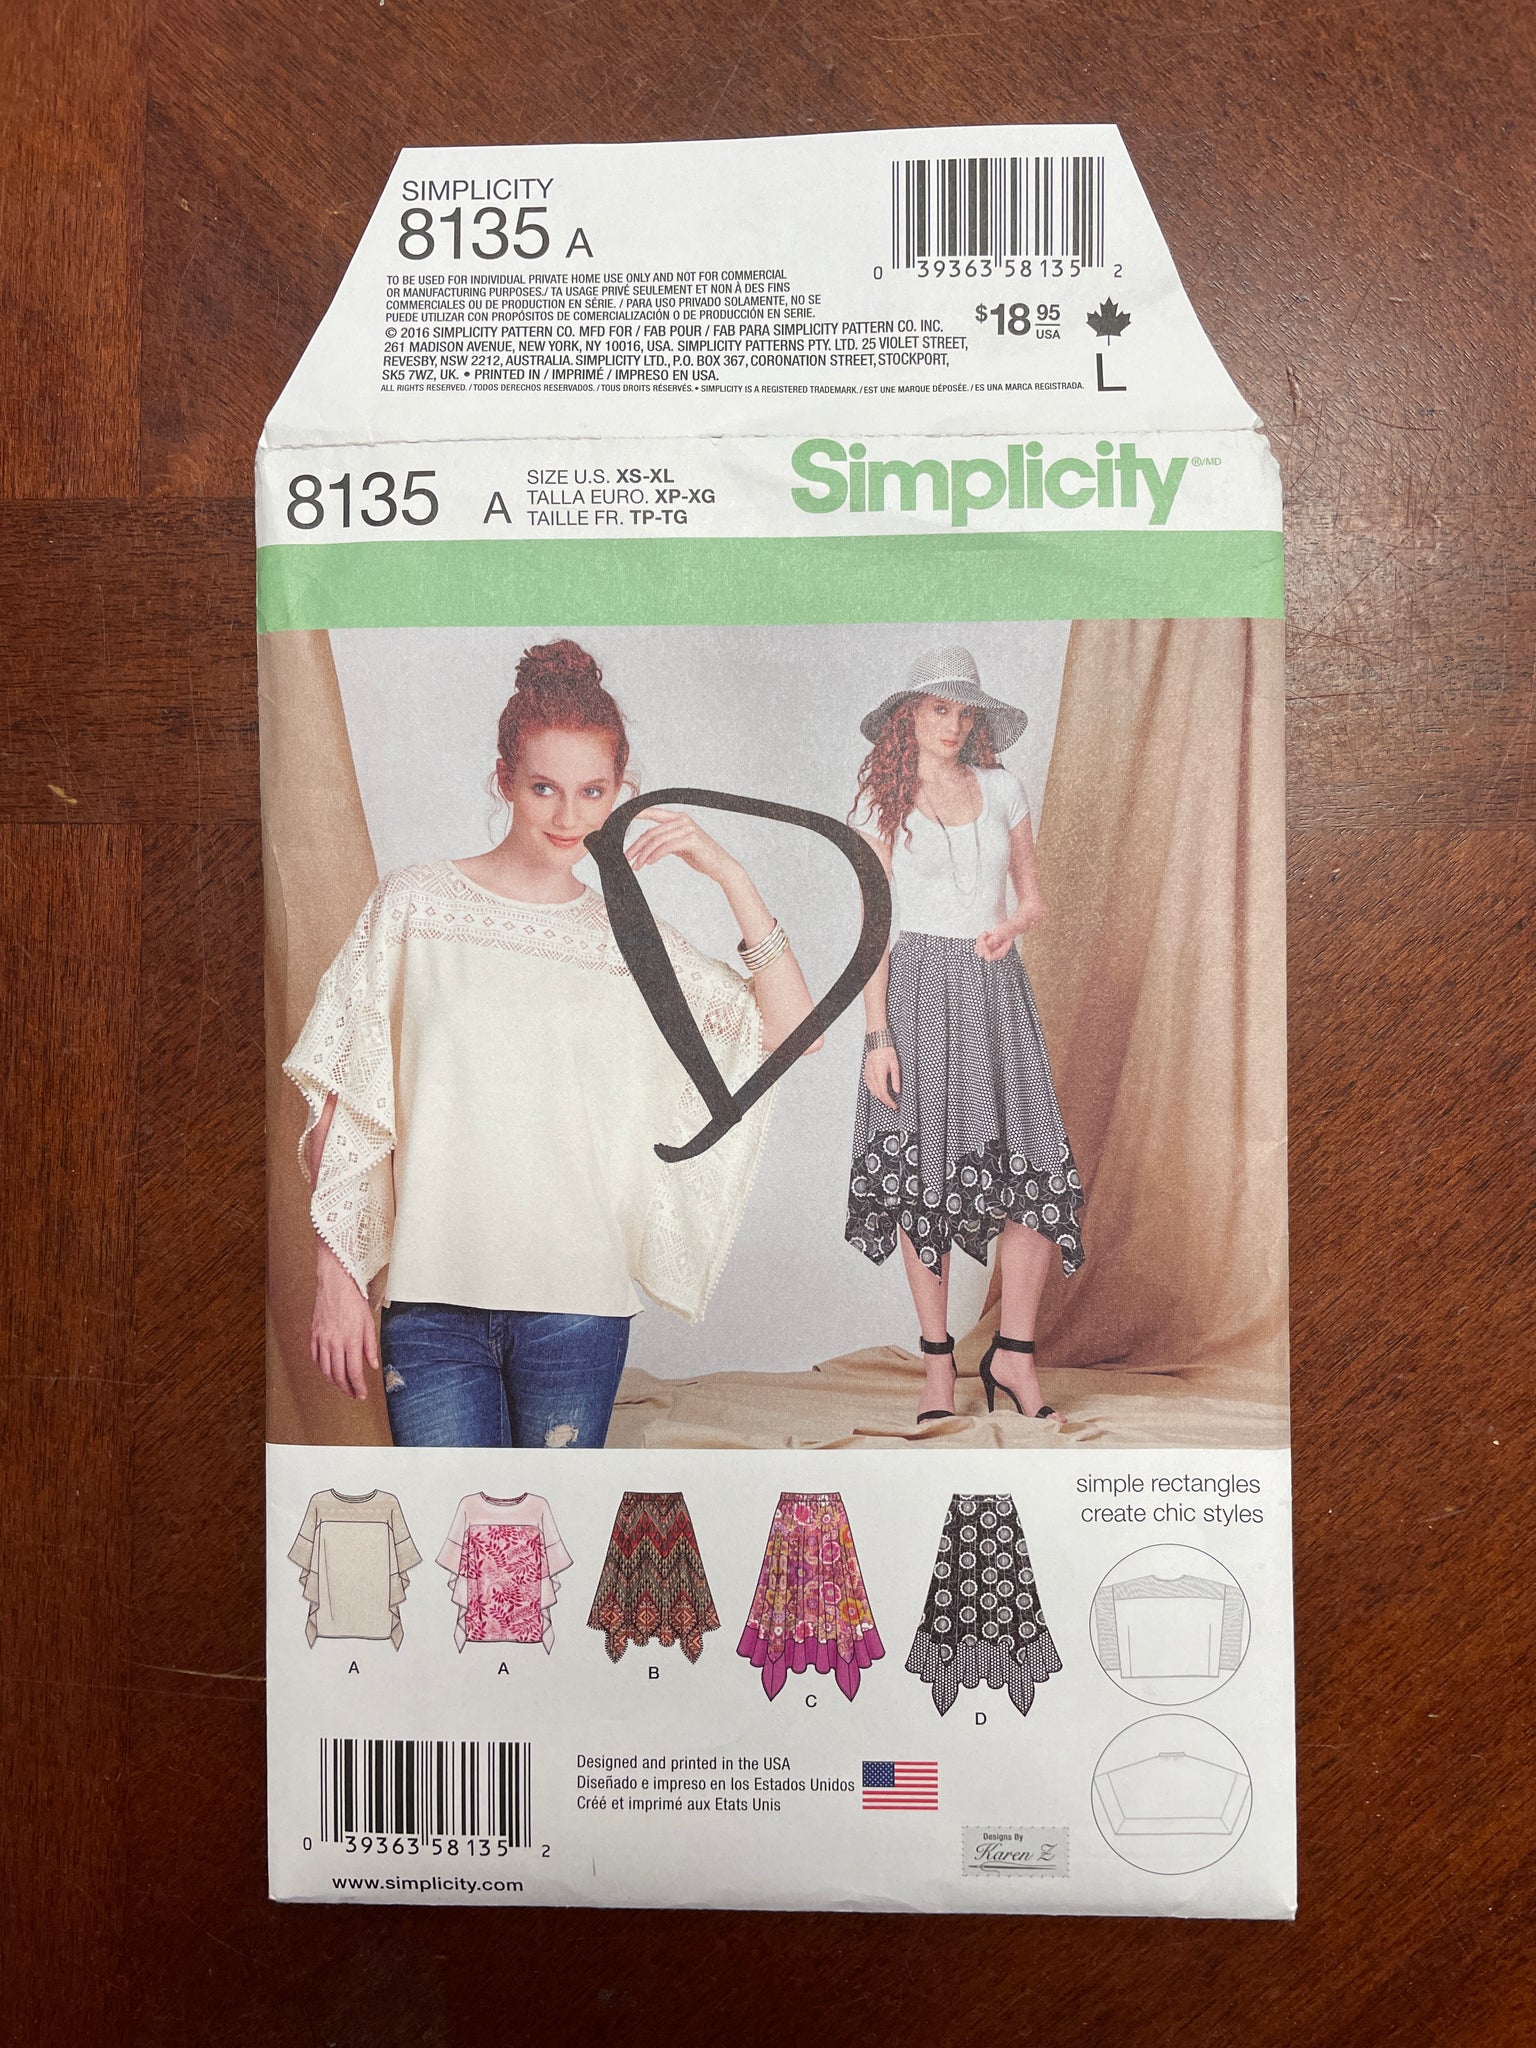 2016 Simplicity 8135 Pattern - Tunic and Skirt